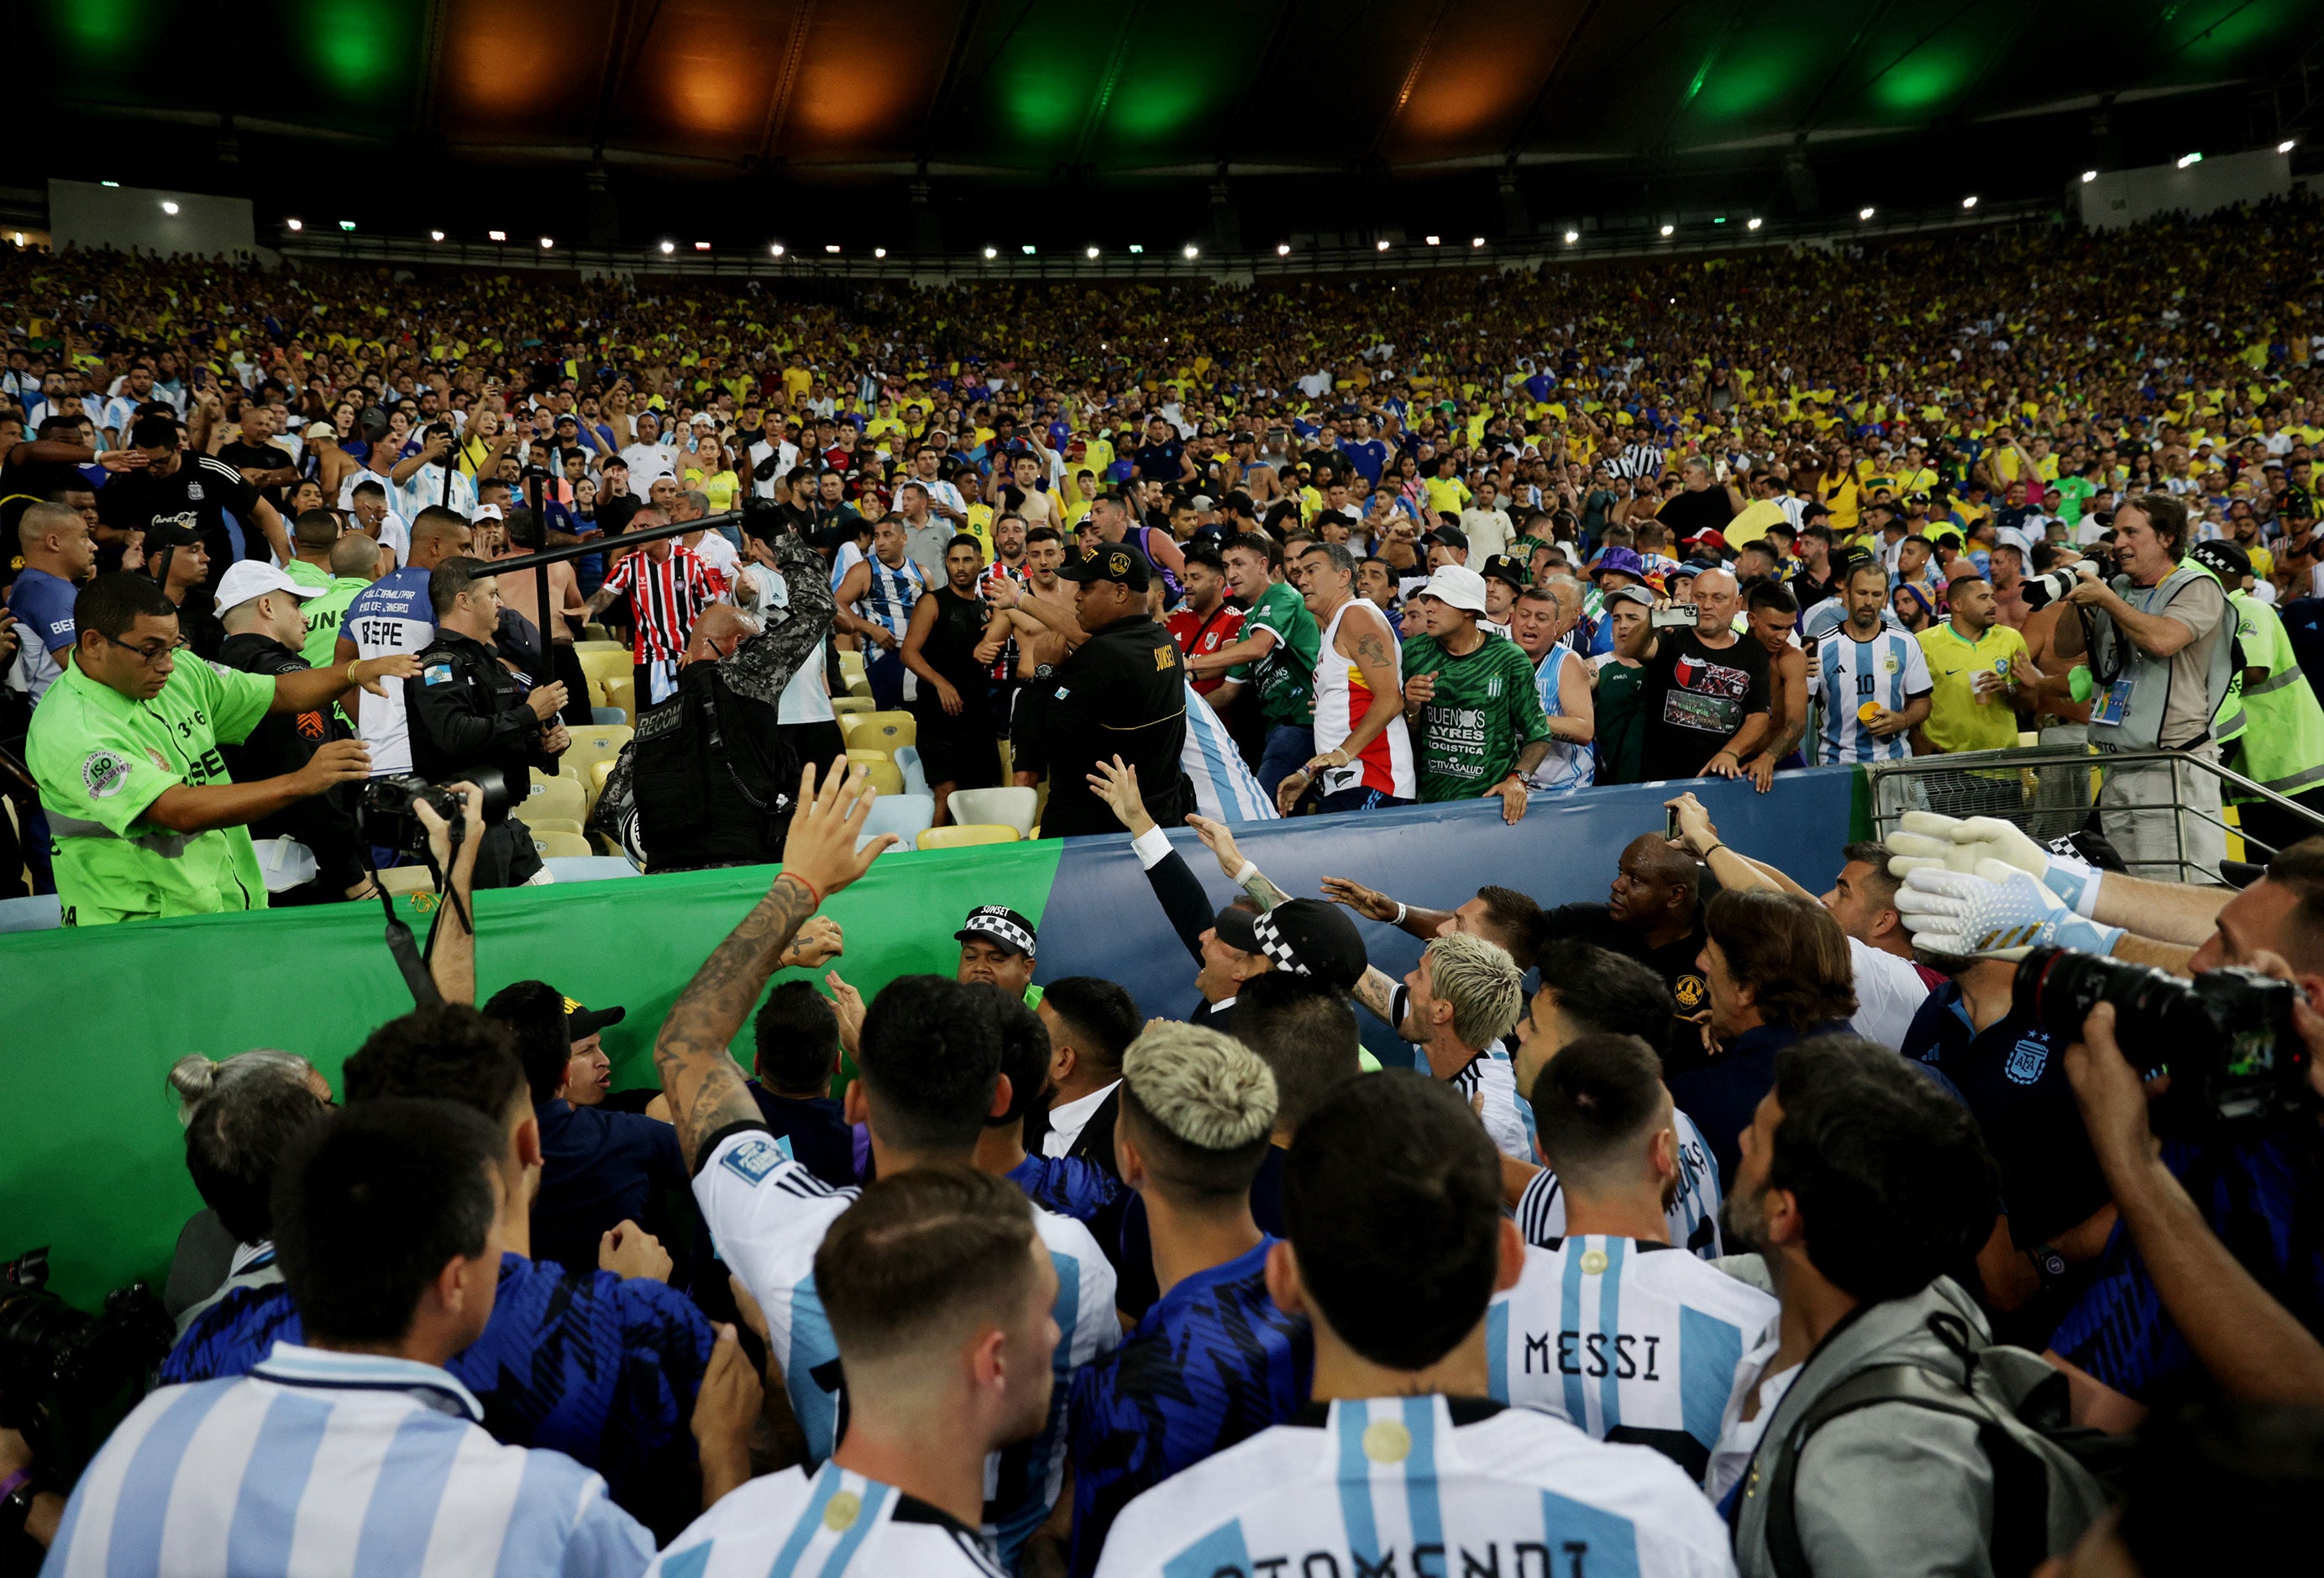 Argentina players went to the away fans and appealed for calm